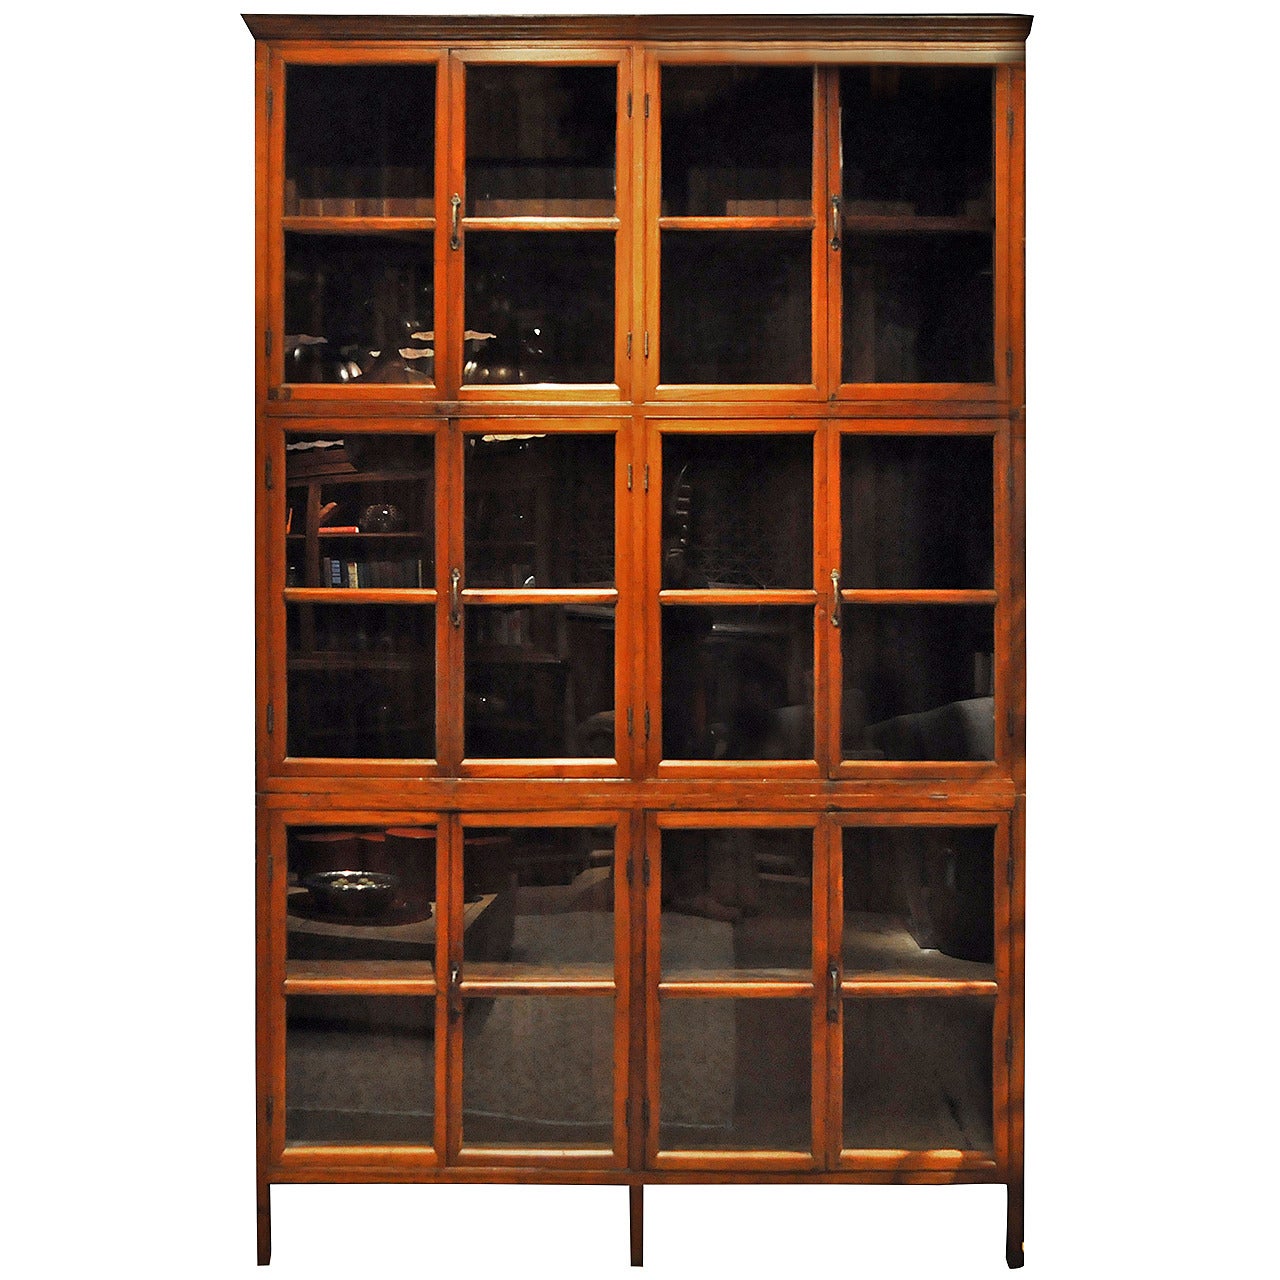 British Colonial Bookcase with Six Shelves